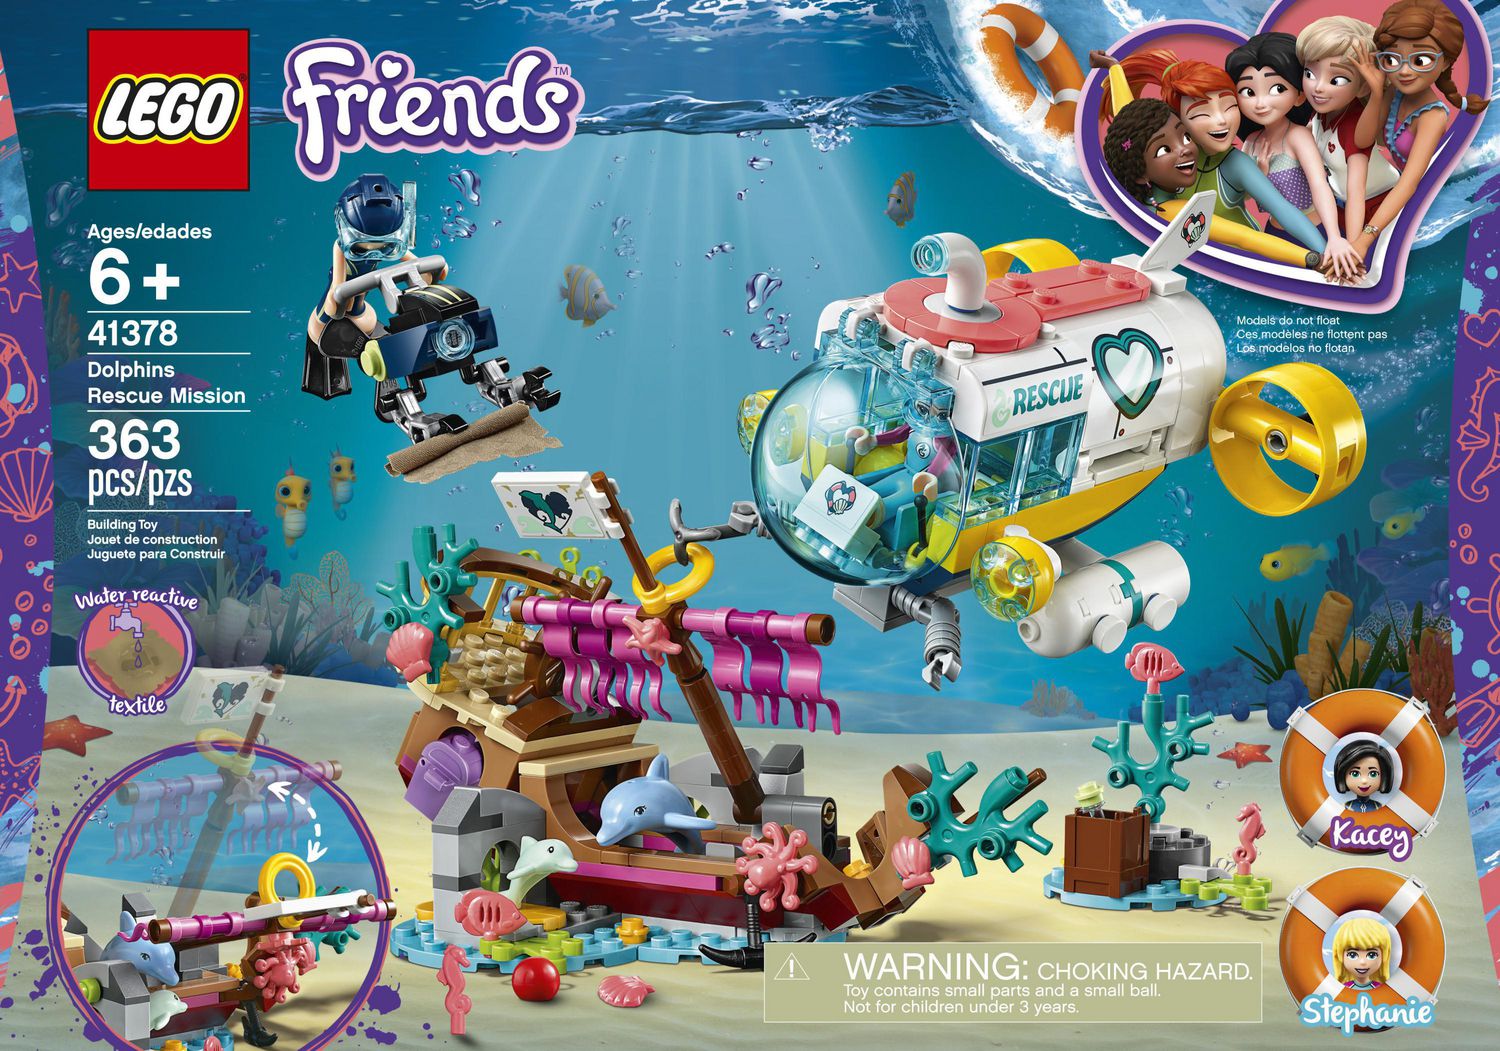 LEGO Friends Dolphins Rescue Mission 41378 Toy Building Set